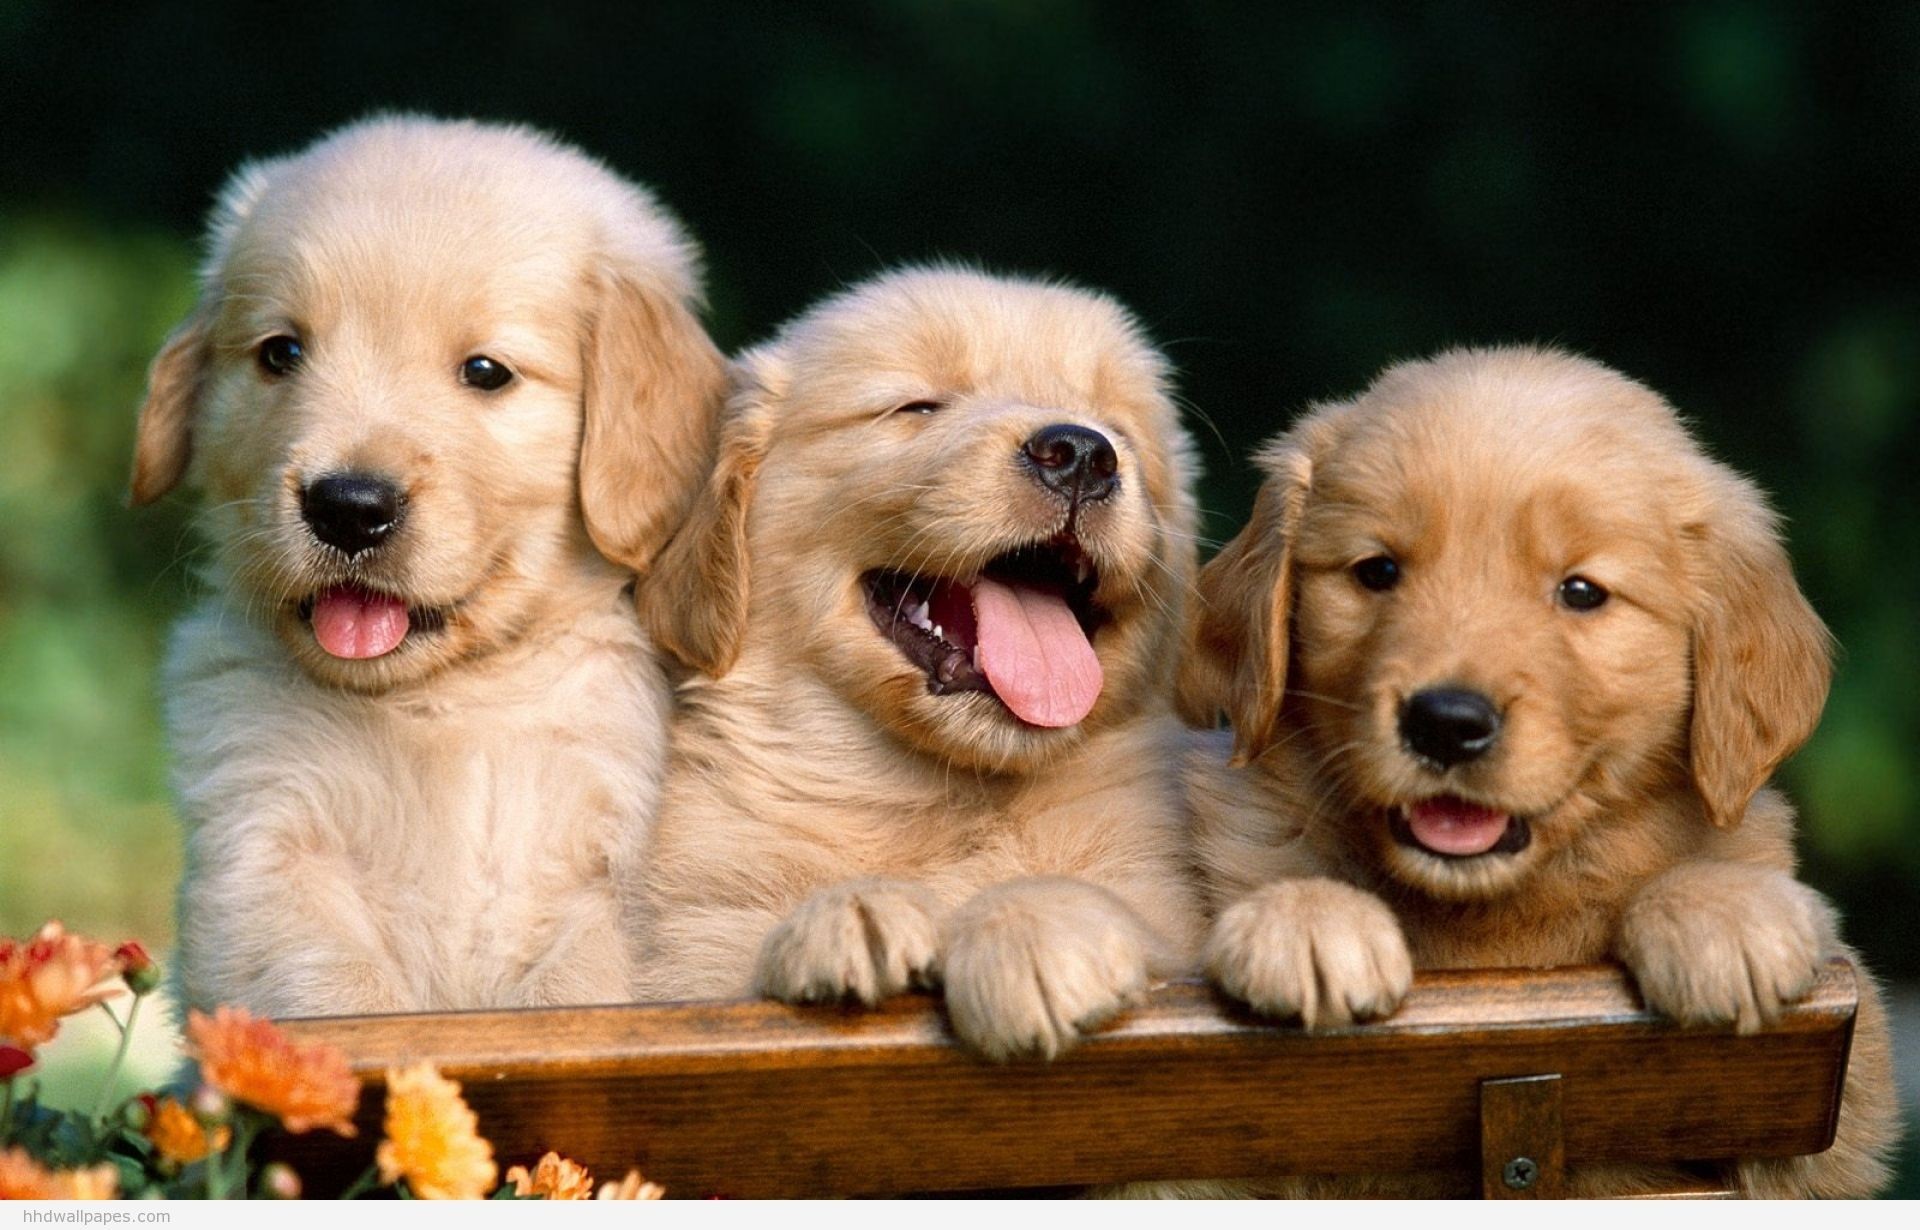 1920x1230 Cute Puppy: Reality Cute Puppy Images for desktop and mobile